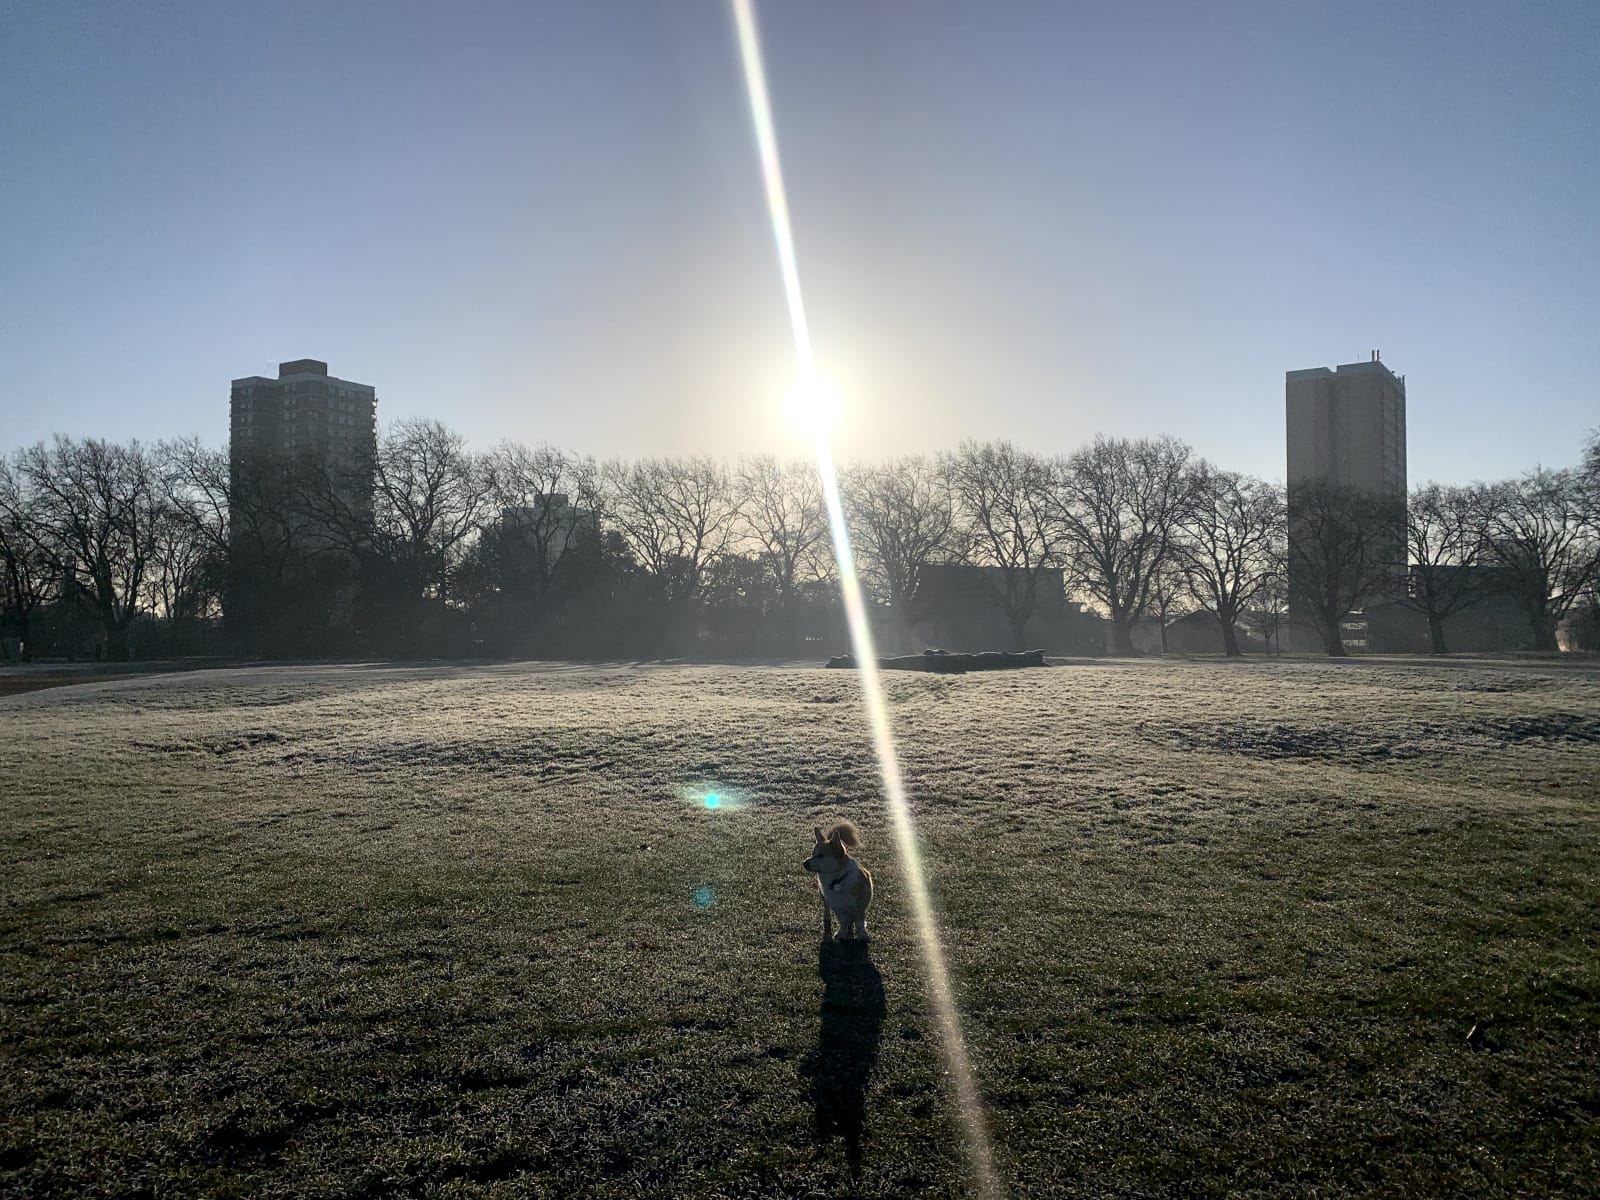 A corgi standing in a frosty park at sunrise on a clear morning. A light flare cuts across the centre of the image and a line of trees flanked by two residential high-rise buildings sits on the horizon.